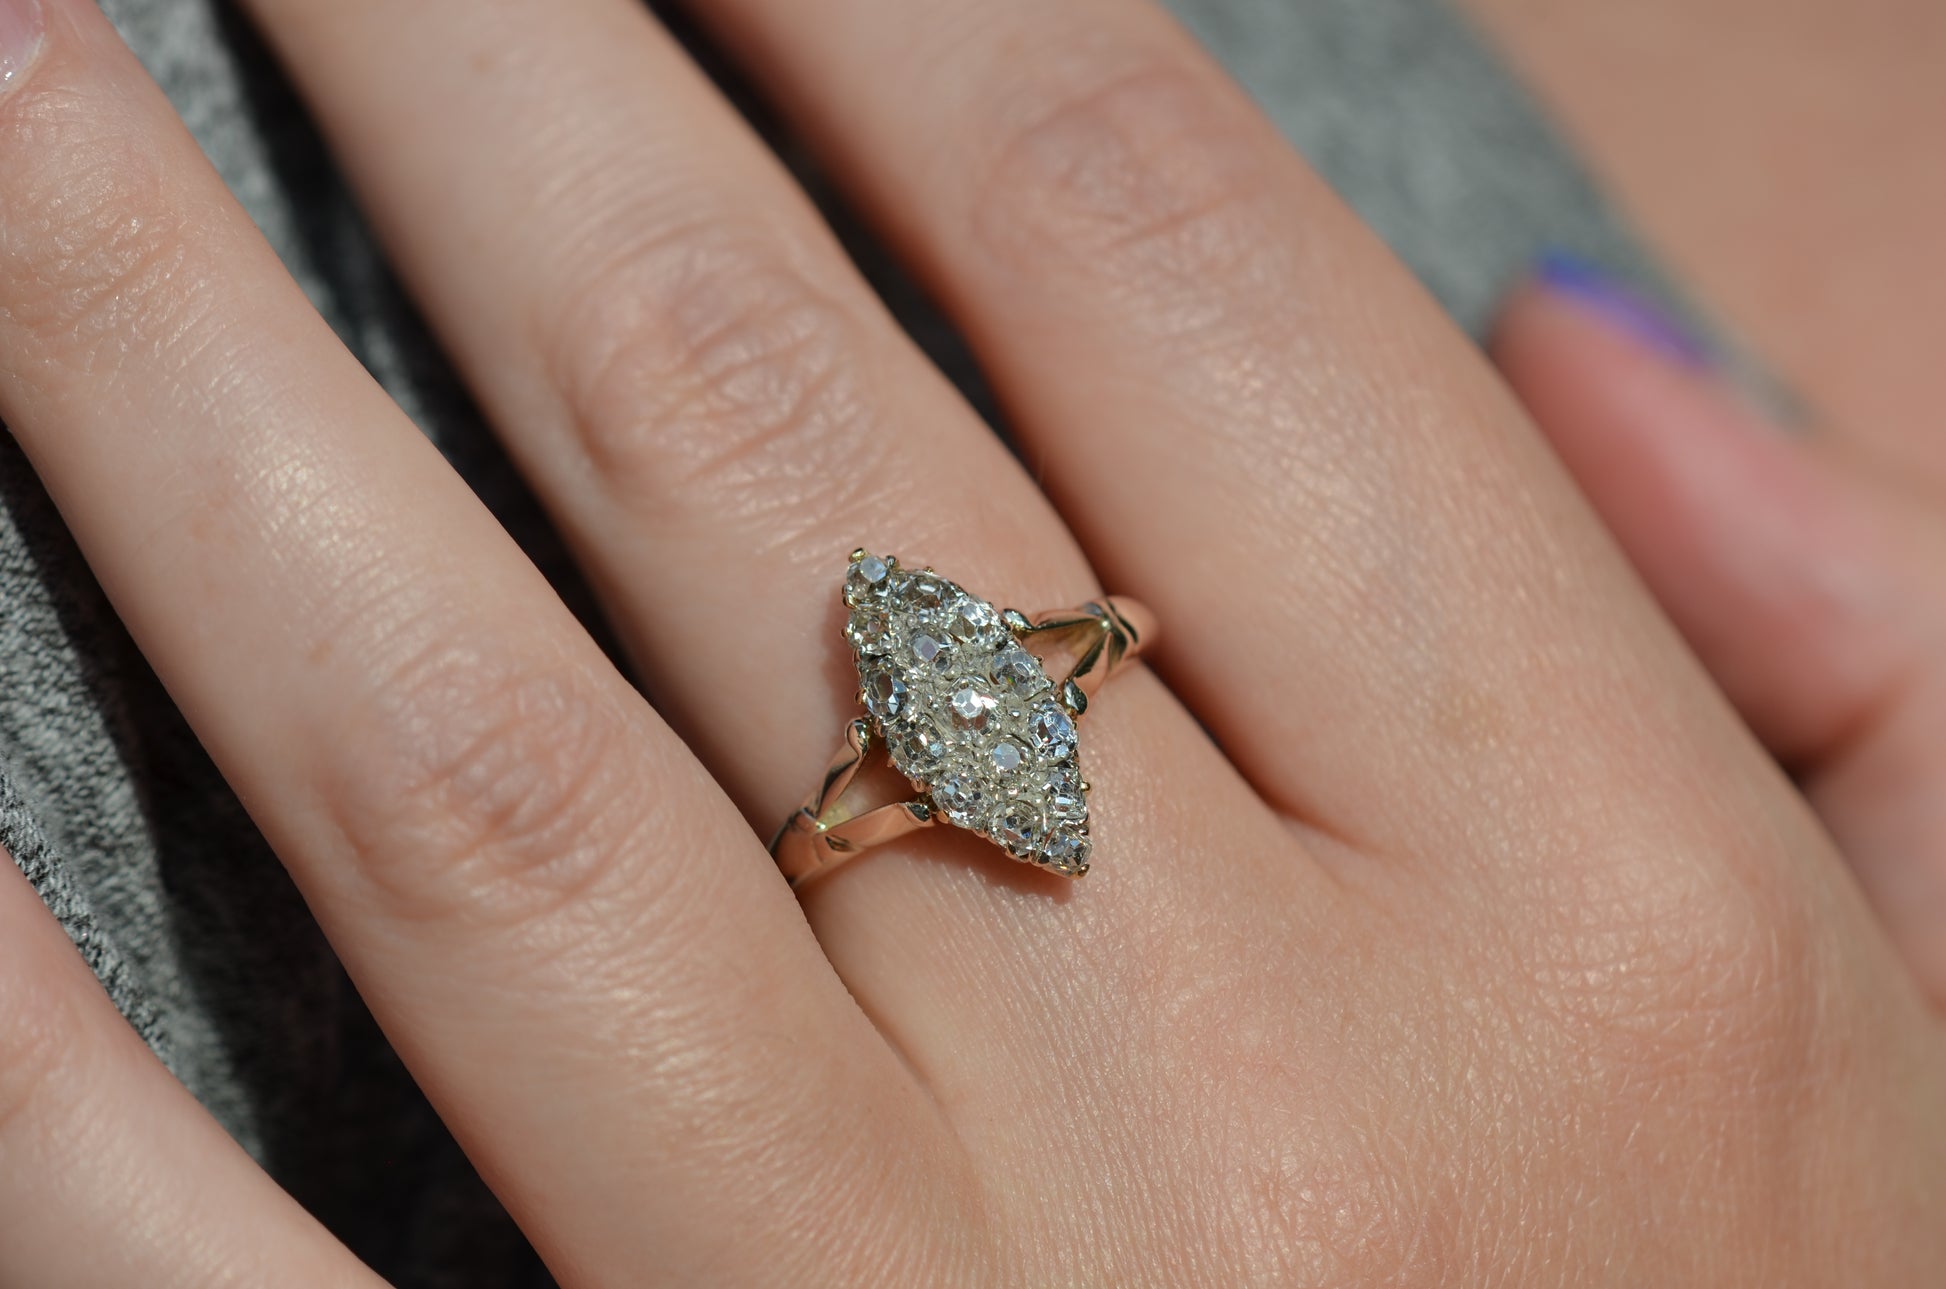 A closely cropped macro photo of the antique ring on a Caucasian model's left middle finger to show scale, photographed in natural light that dazzles on the diamonds.